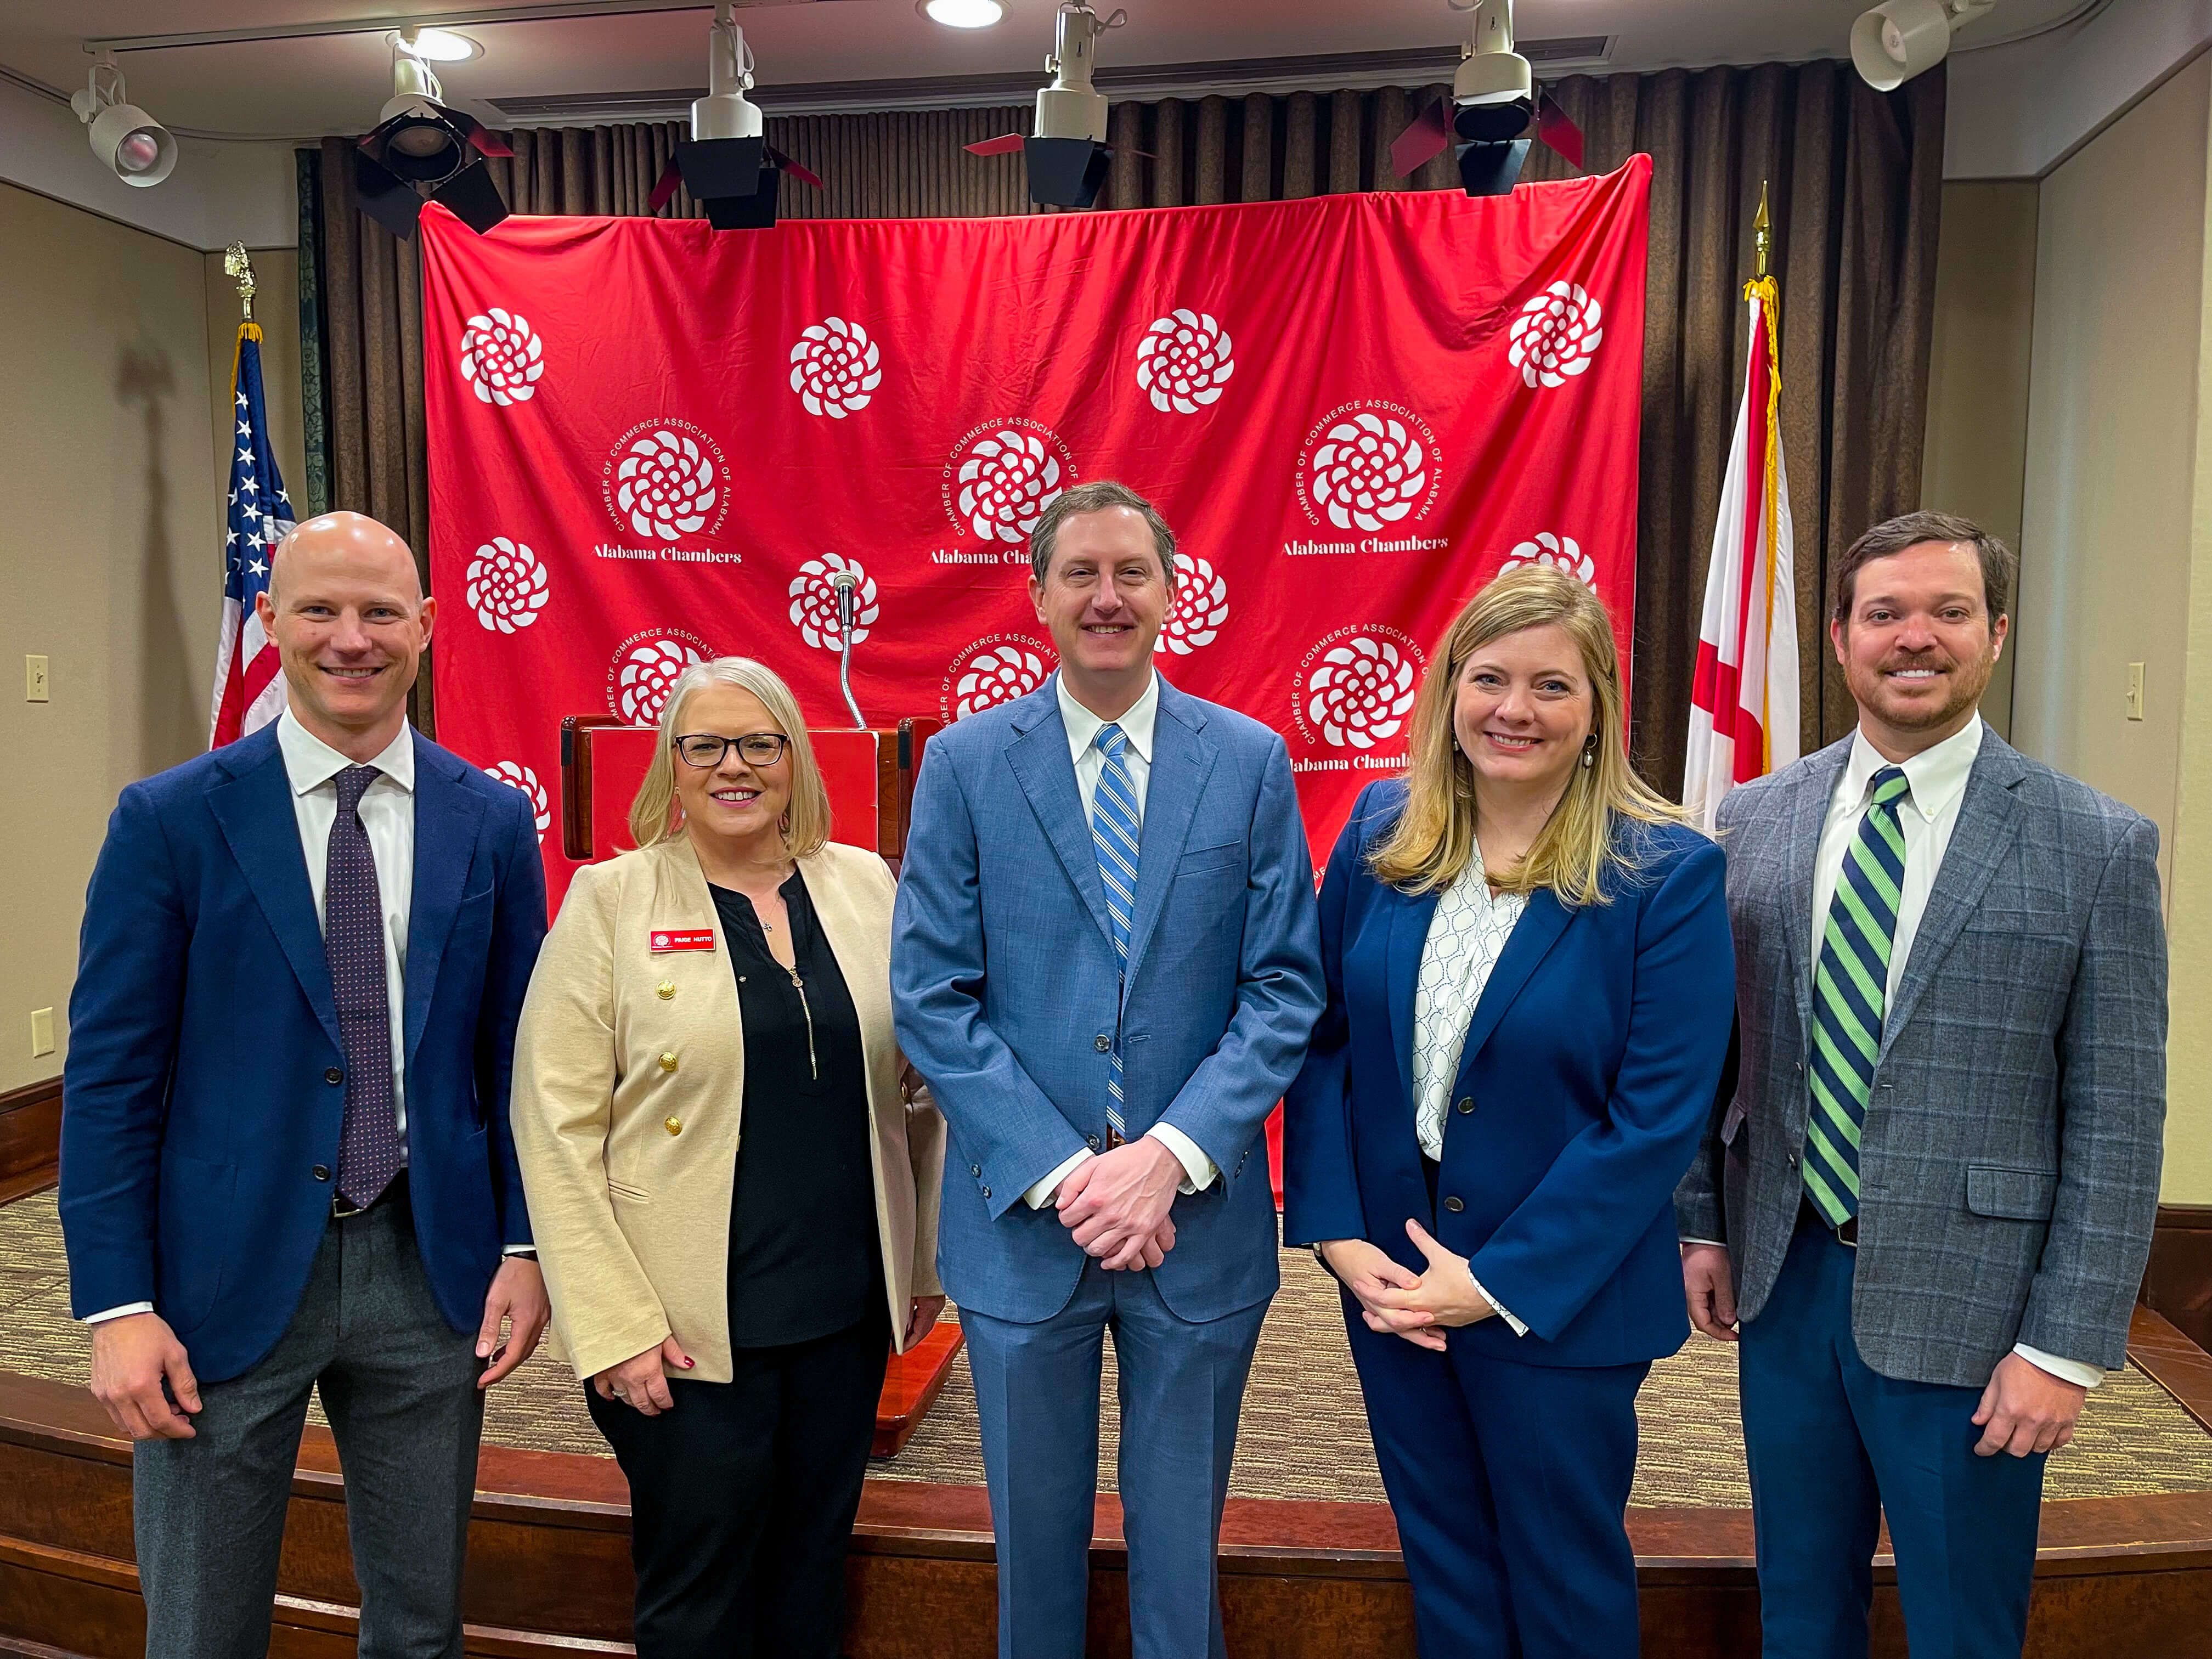 Pictured L-R: Mark Colson - Alabama Trucking Assoc., Paige Hutto - Alabama Chambers, Clay Scofield - Business Council of Alabama, Meredith Drennen - Homewood Chamber, Brince Manning, US Chamber